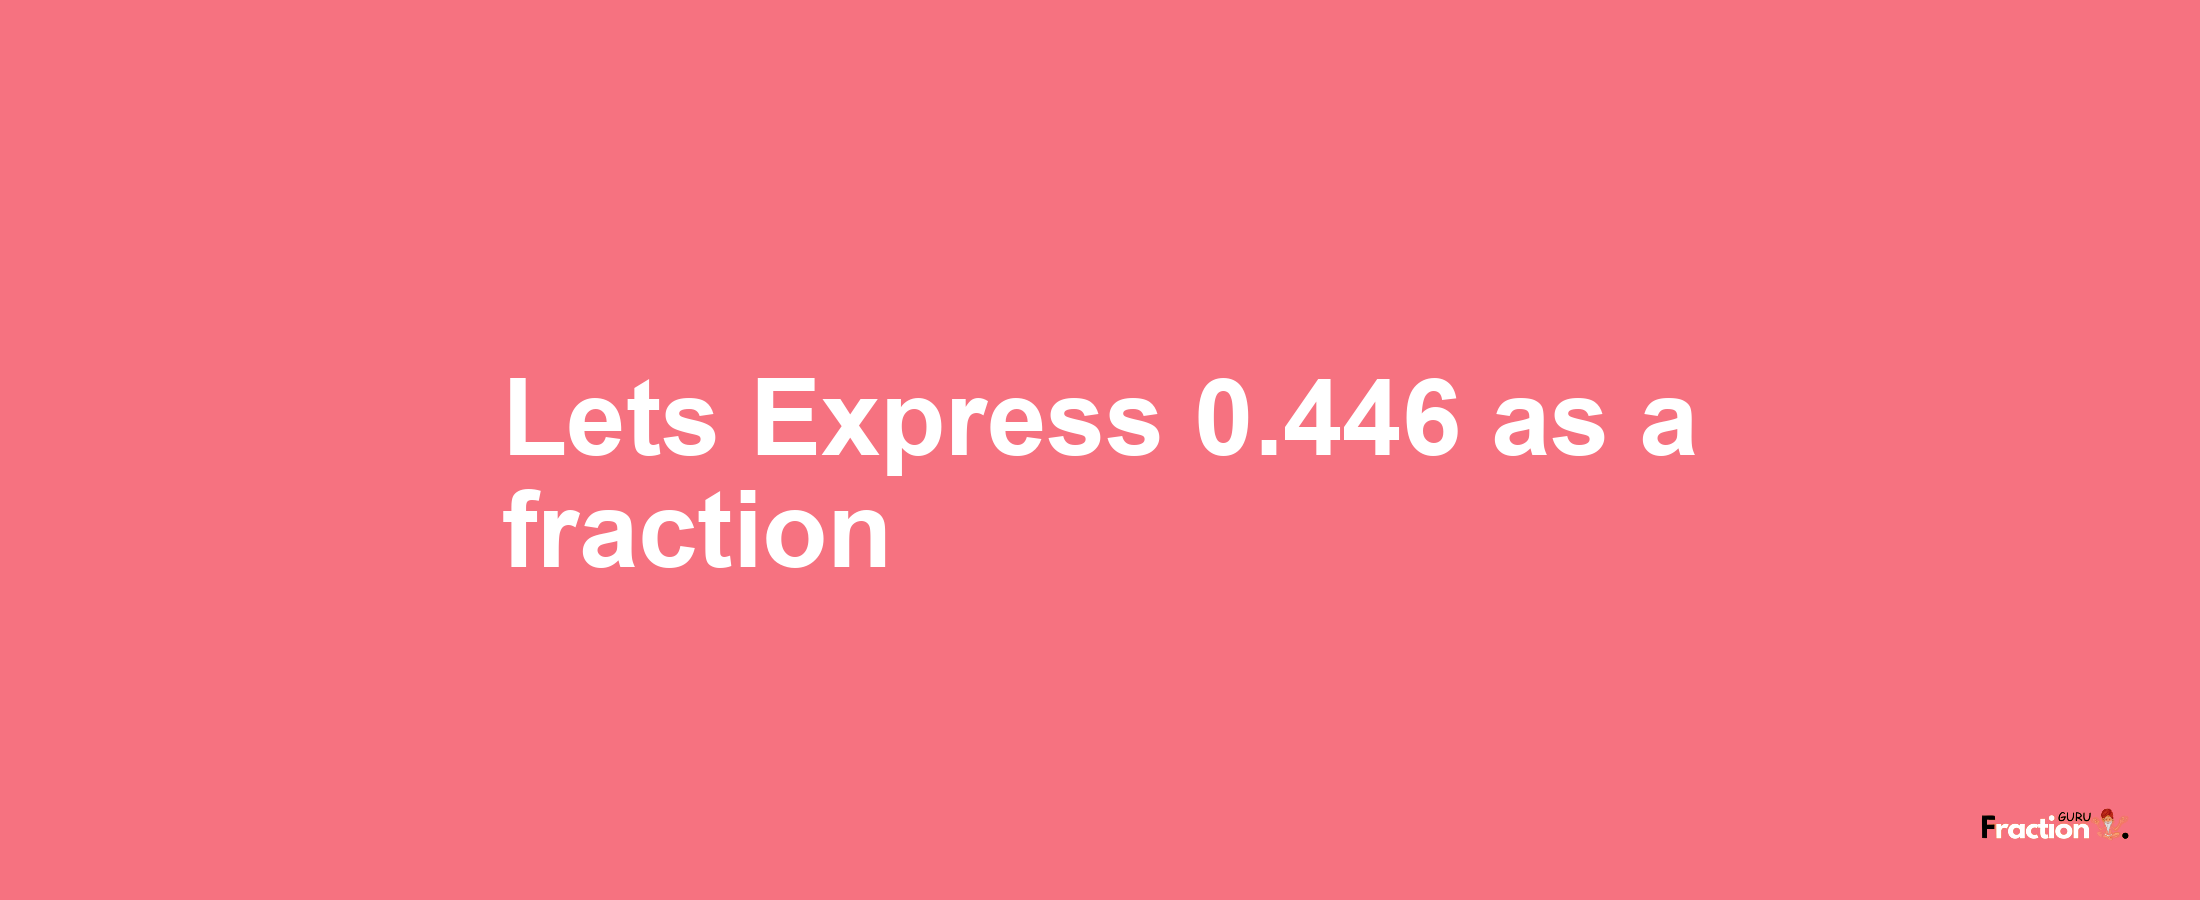 Lets Express 0.446 as afraction